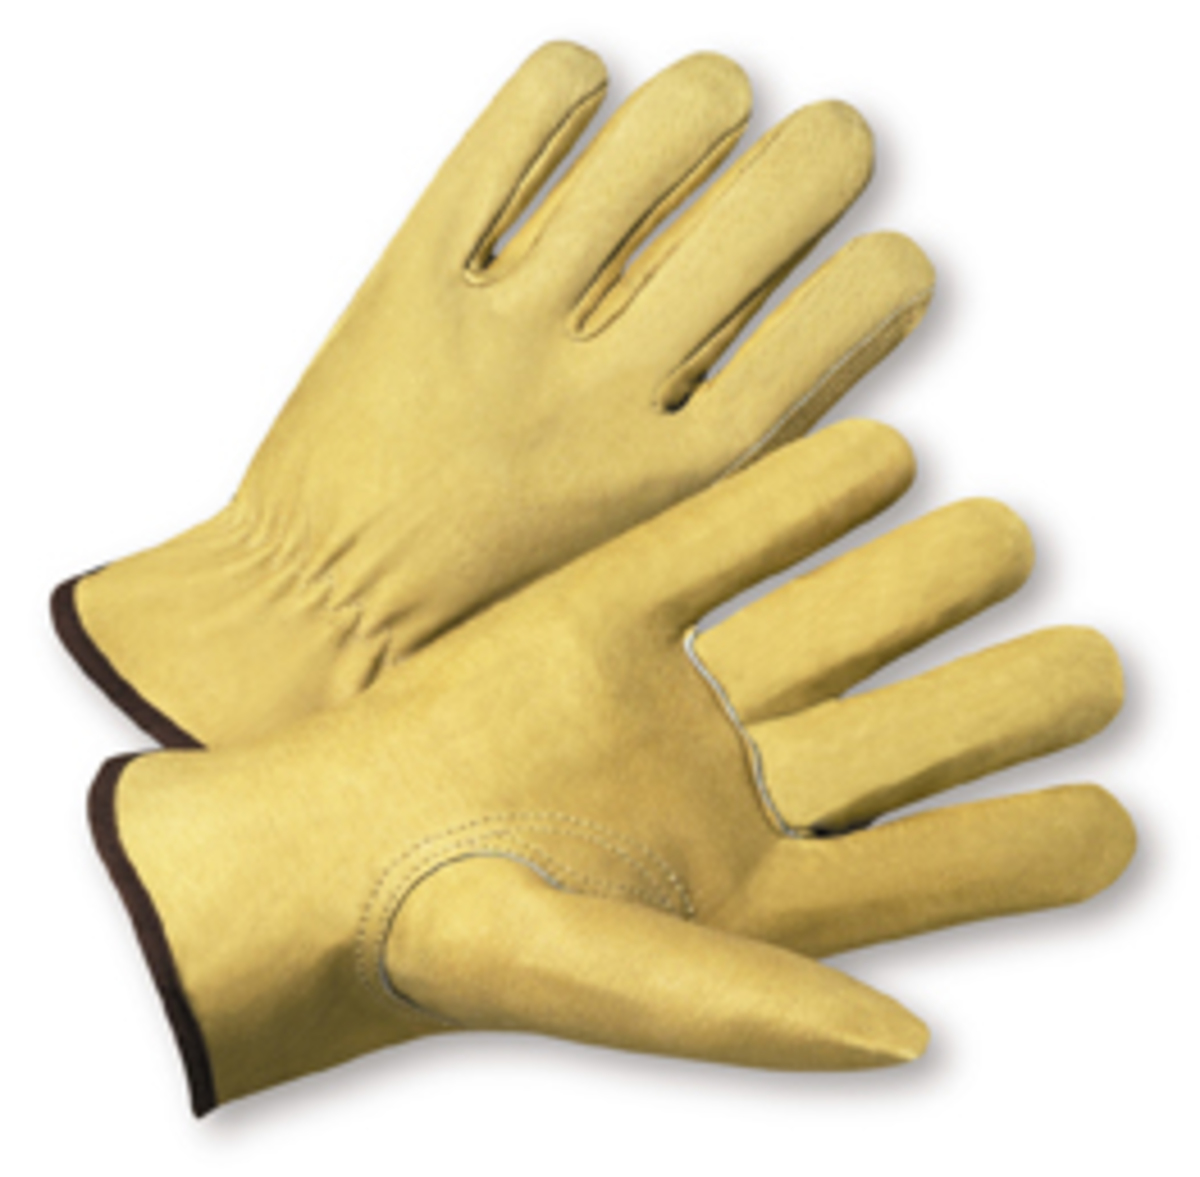 PIP® X-Large Natural Pigskin Fleece Lined Cold Weather Gloves